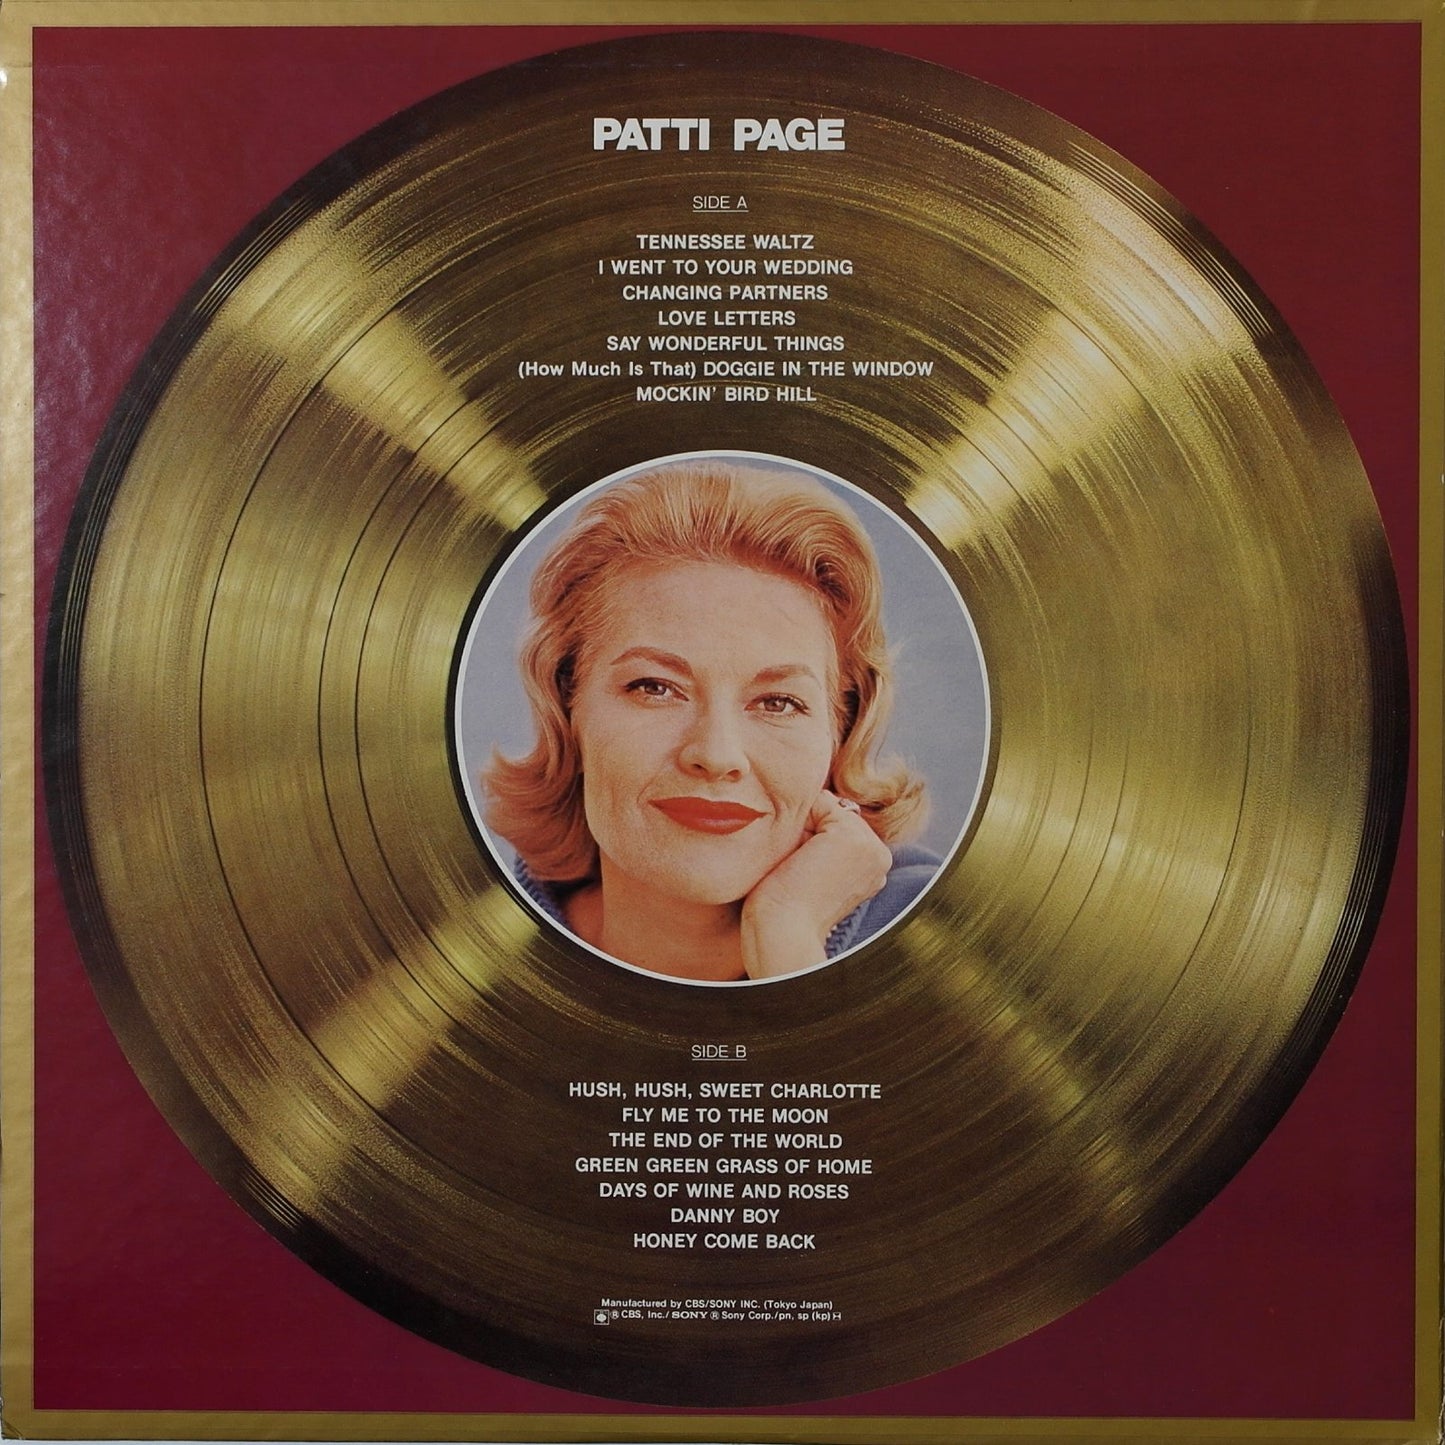 PATTI PAGE - New Gold Disc